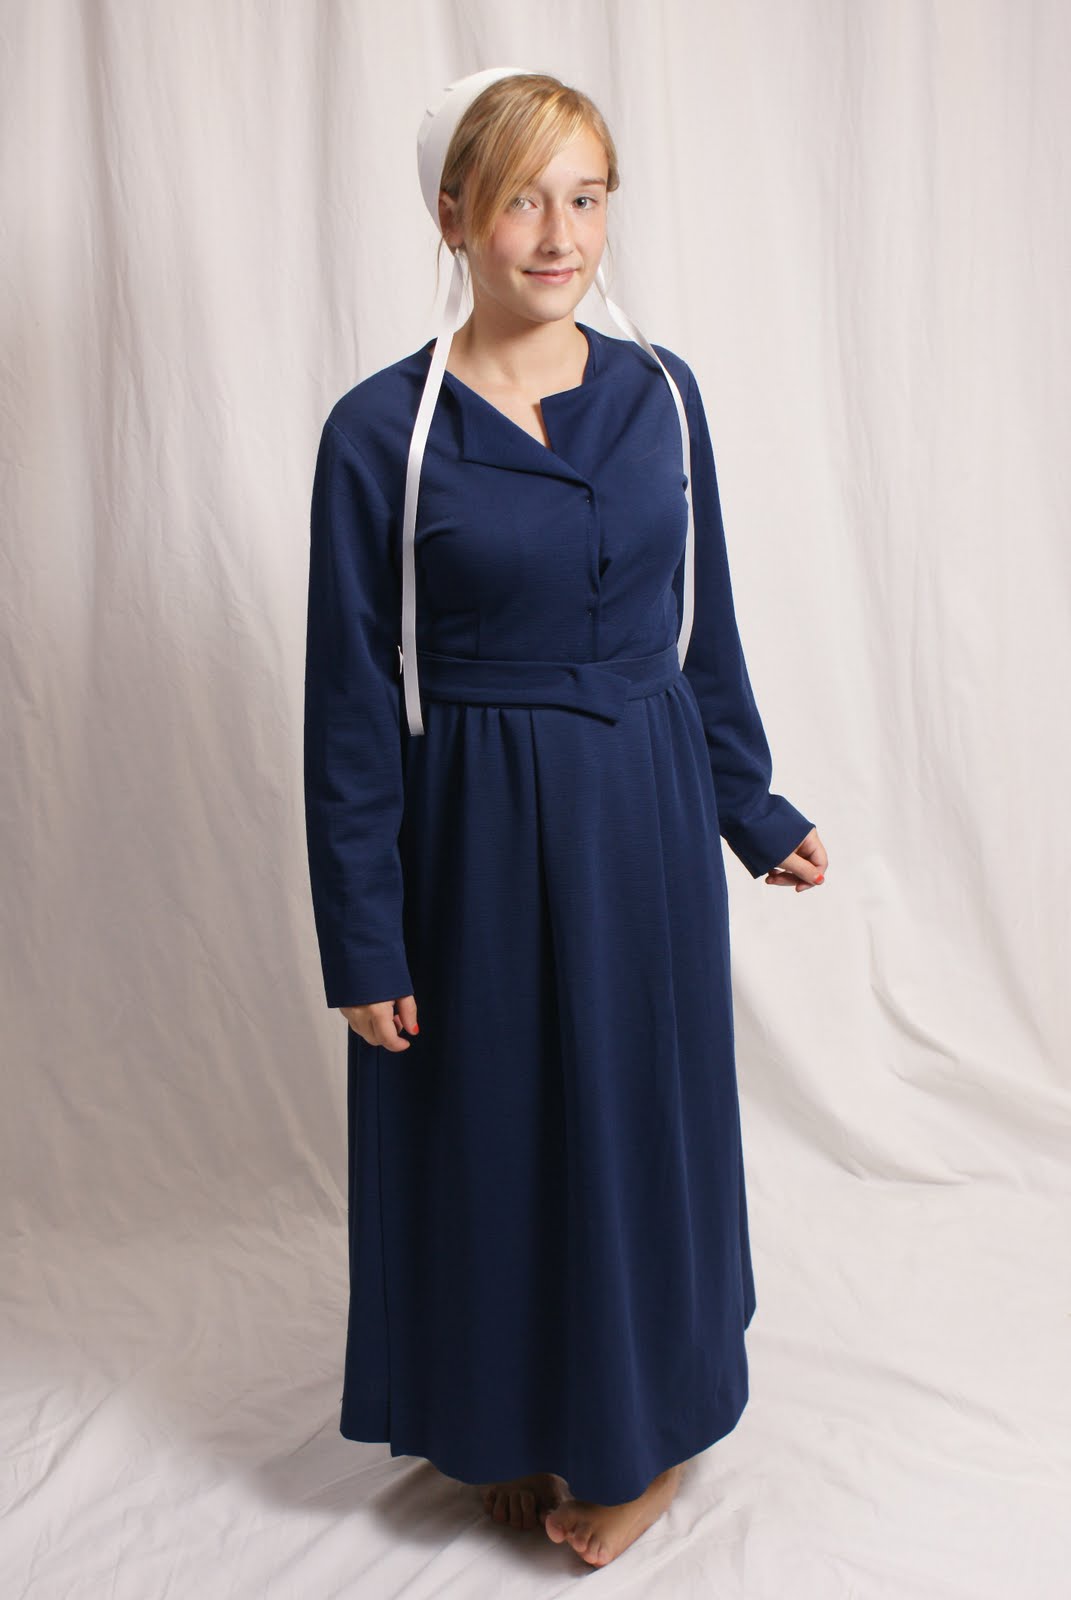 All Things Amish Buy Amish Man S Clothes Here